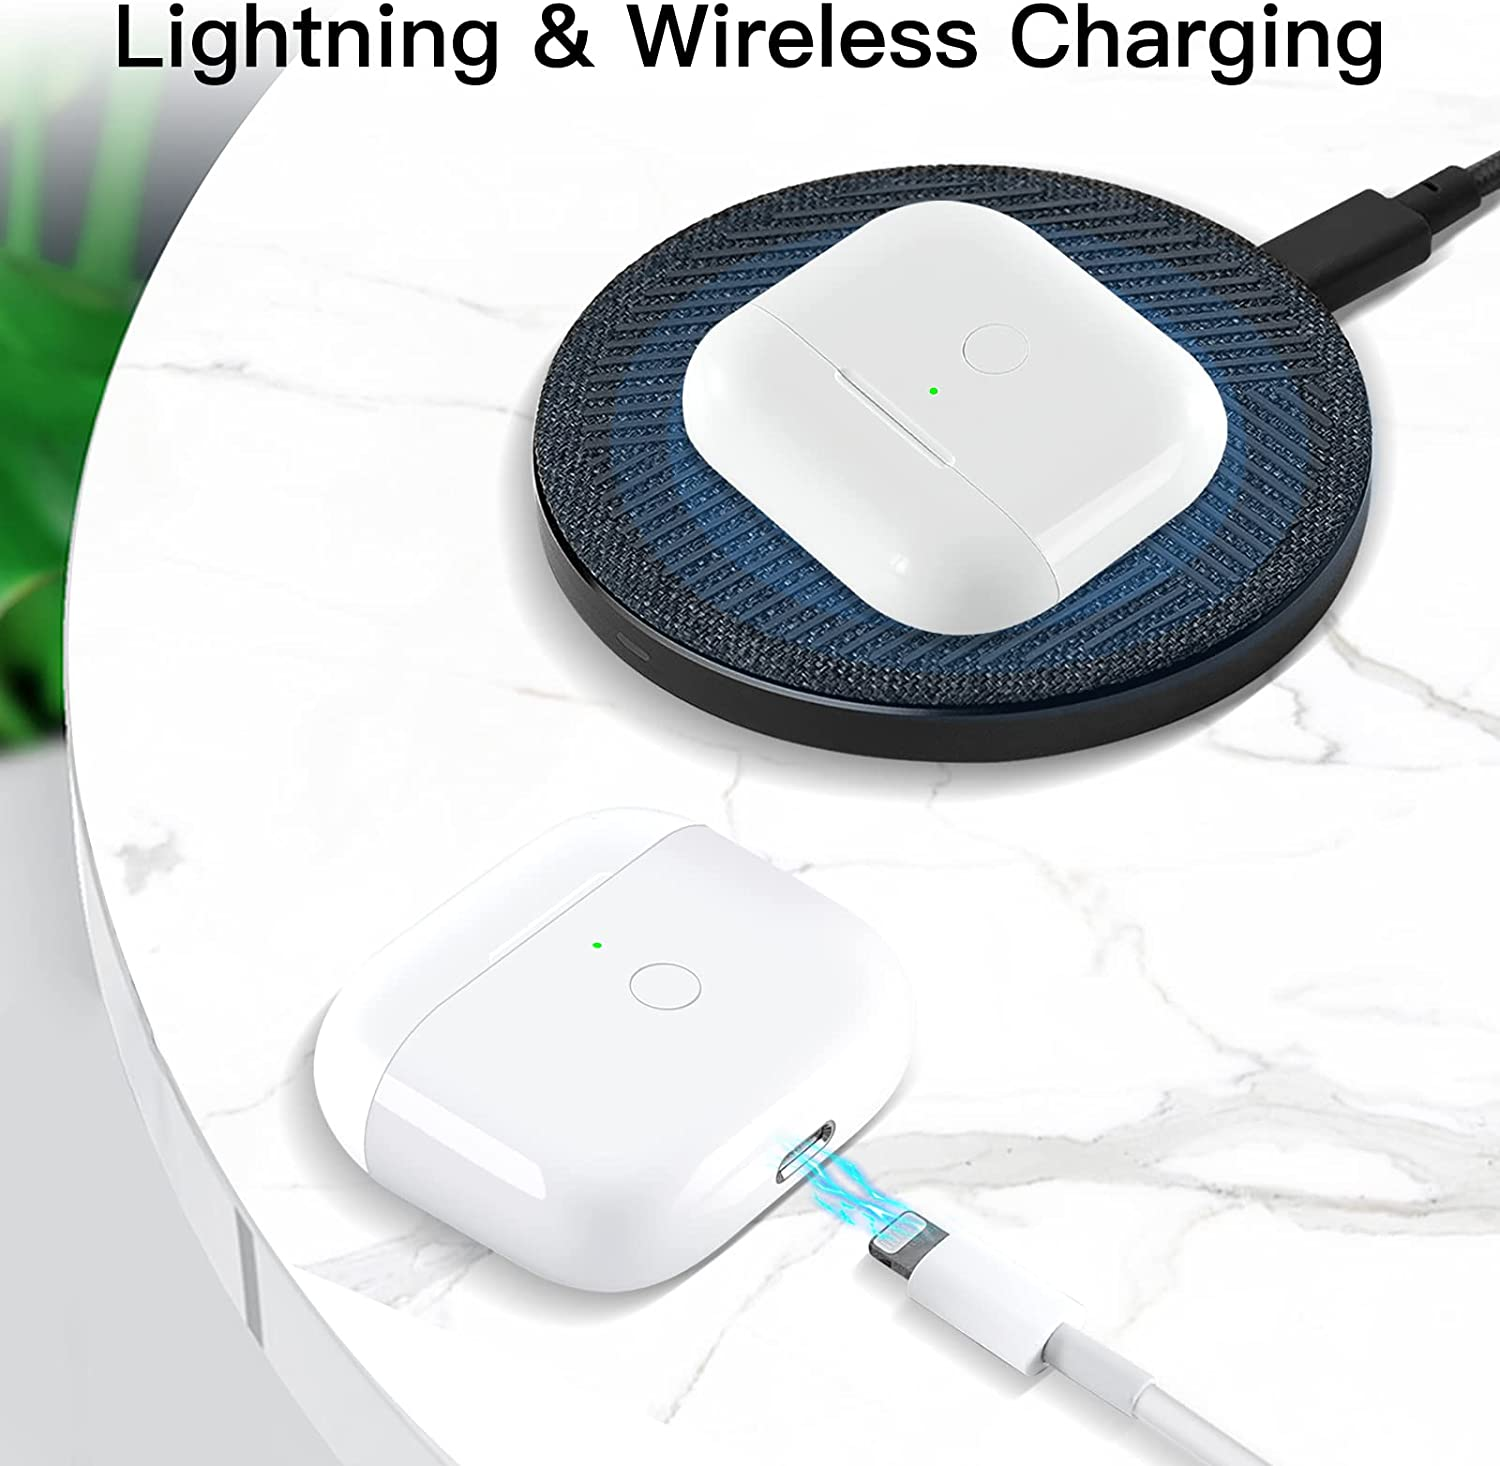 Wireless Charging Case with Bluetooth Pairing